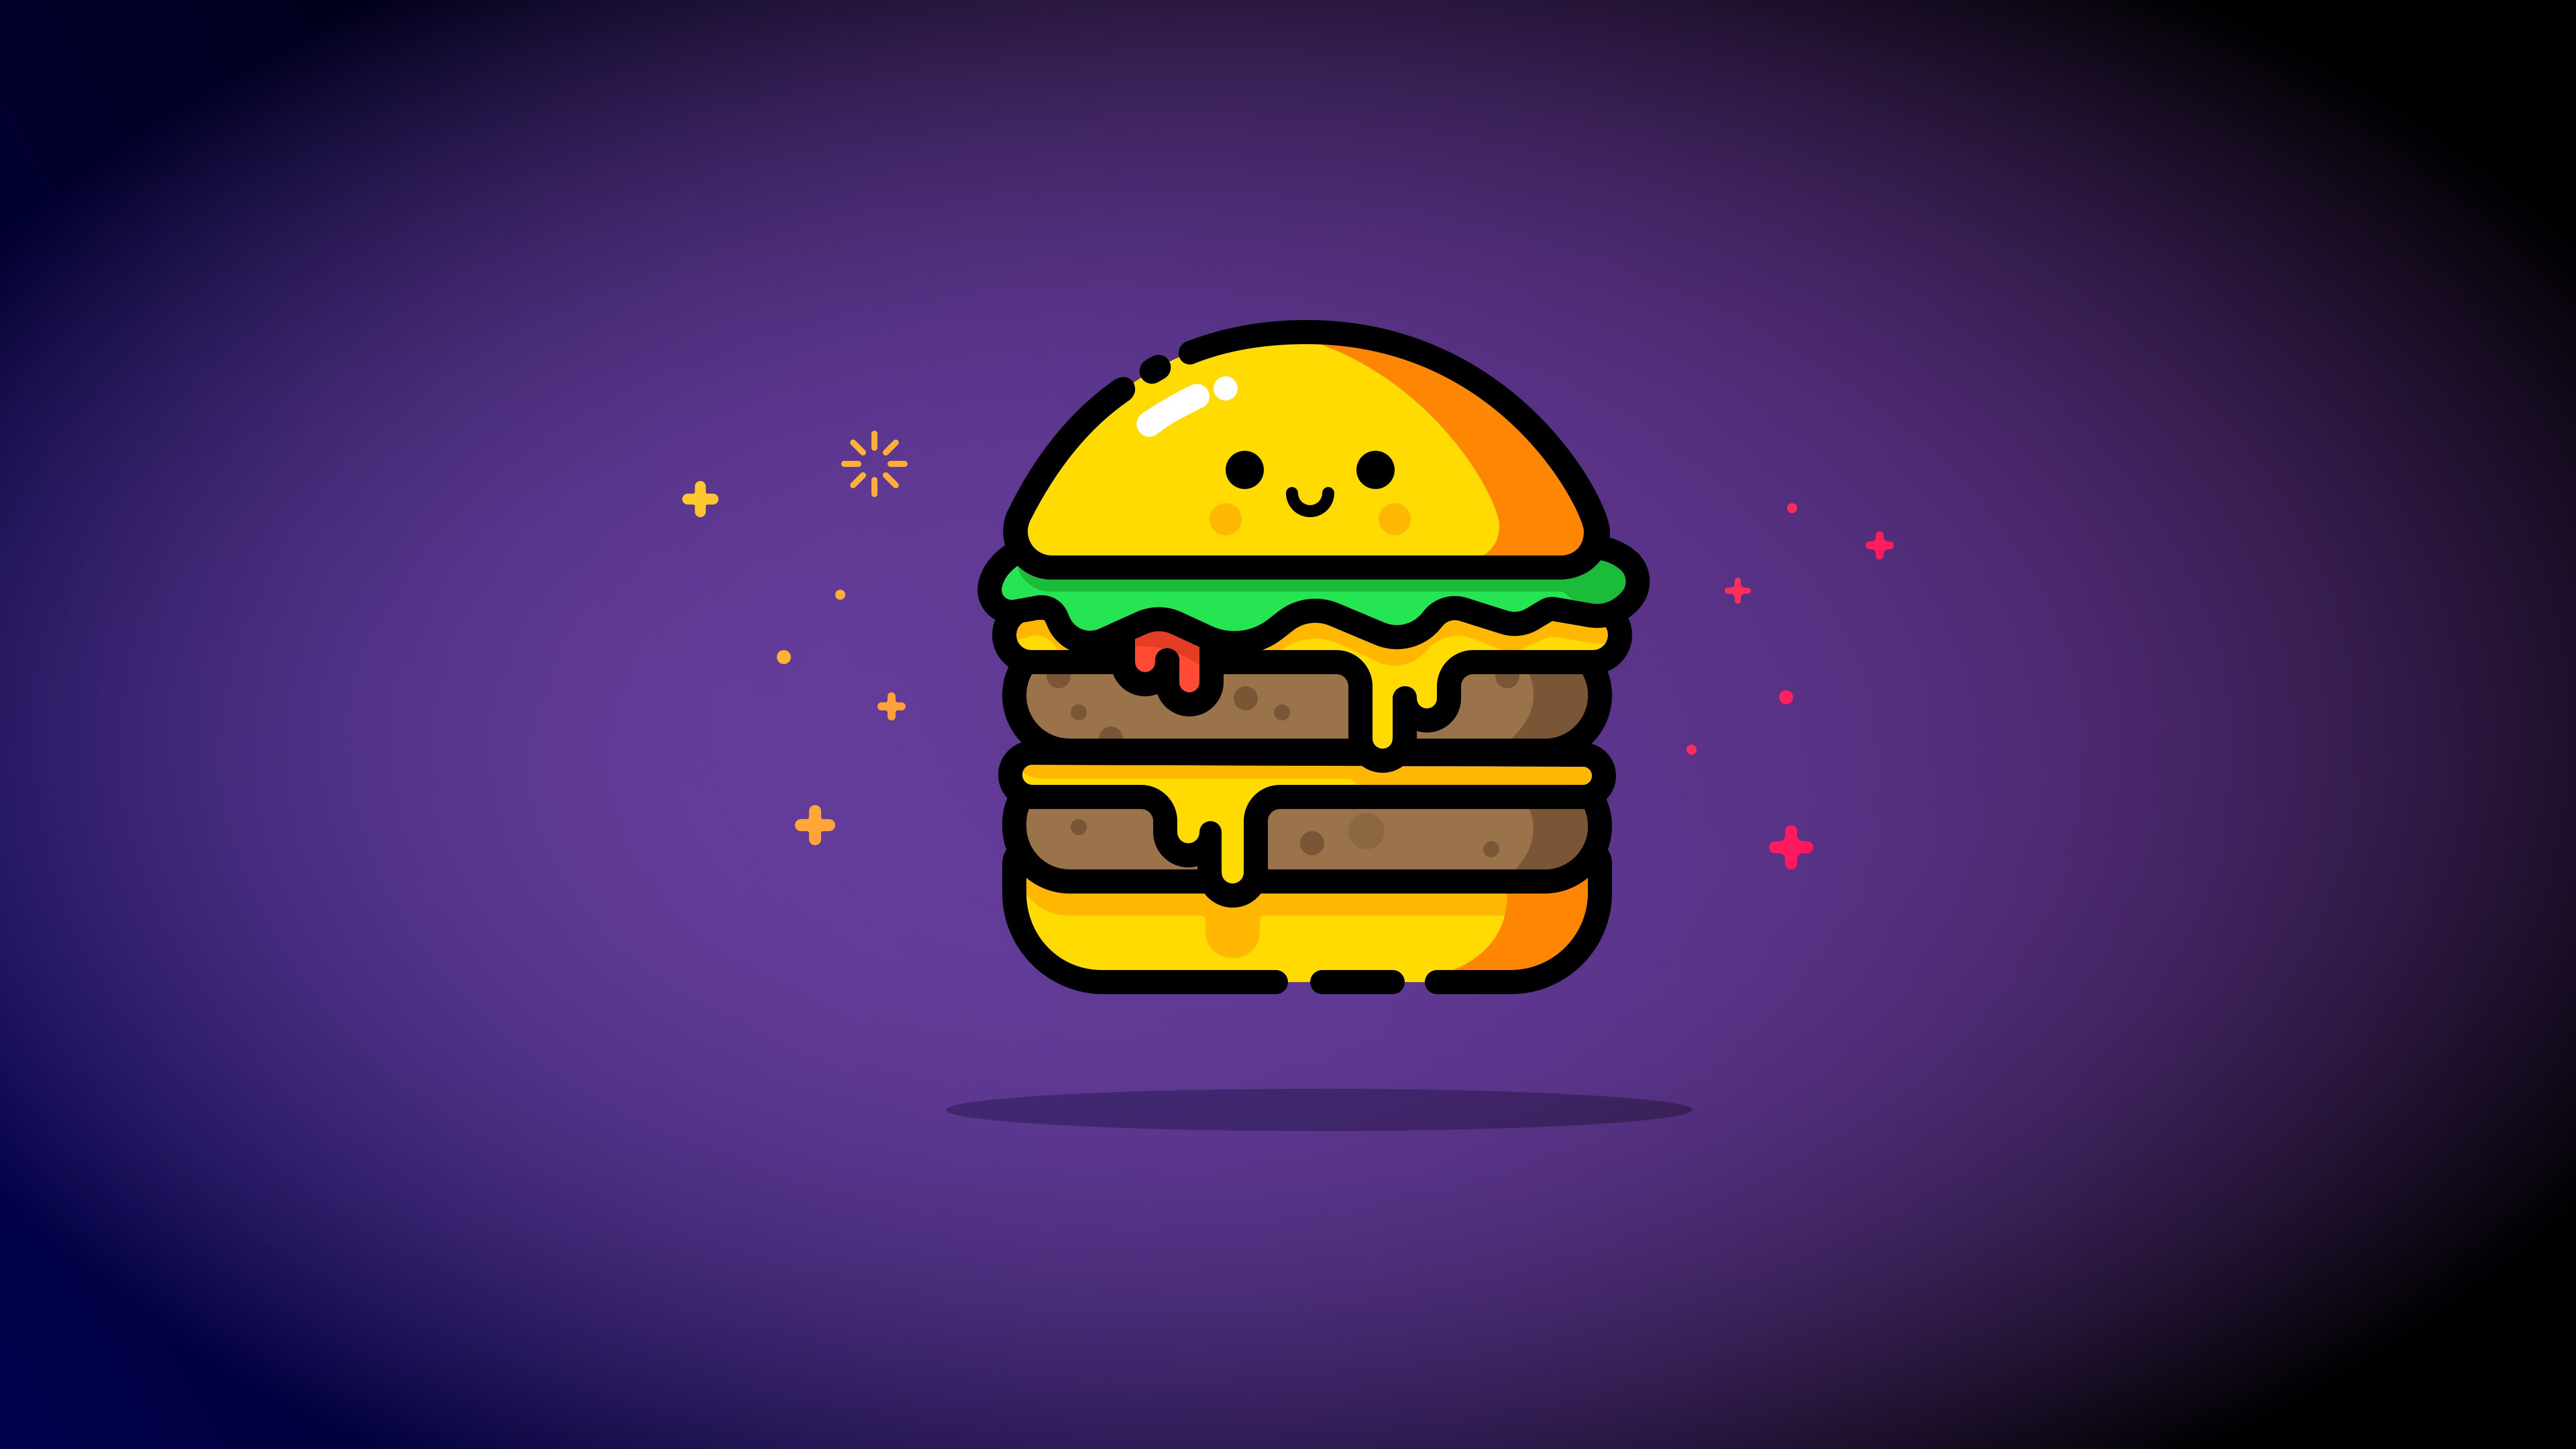 Double cheese wallpaper 5120x2880